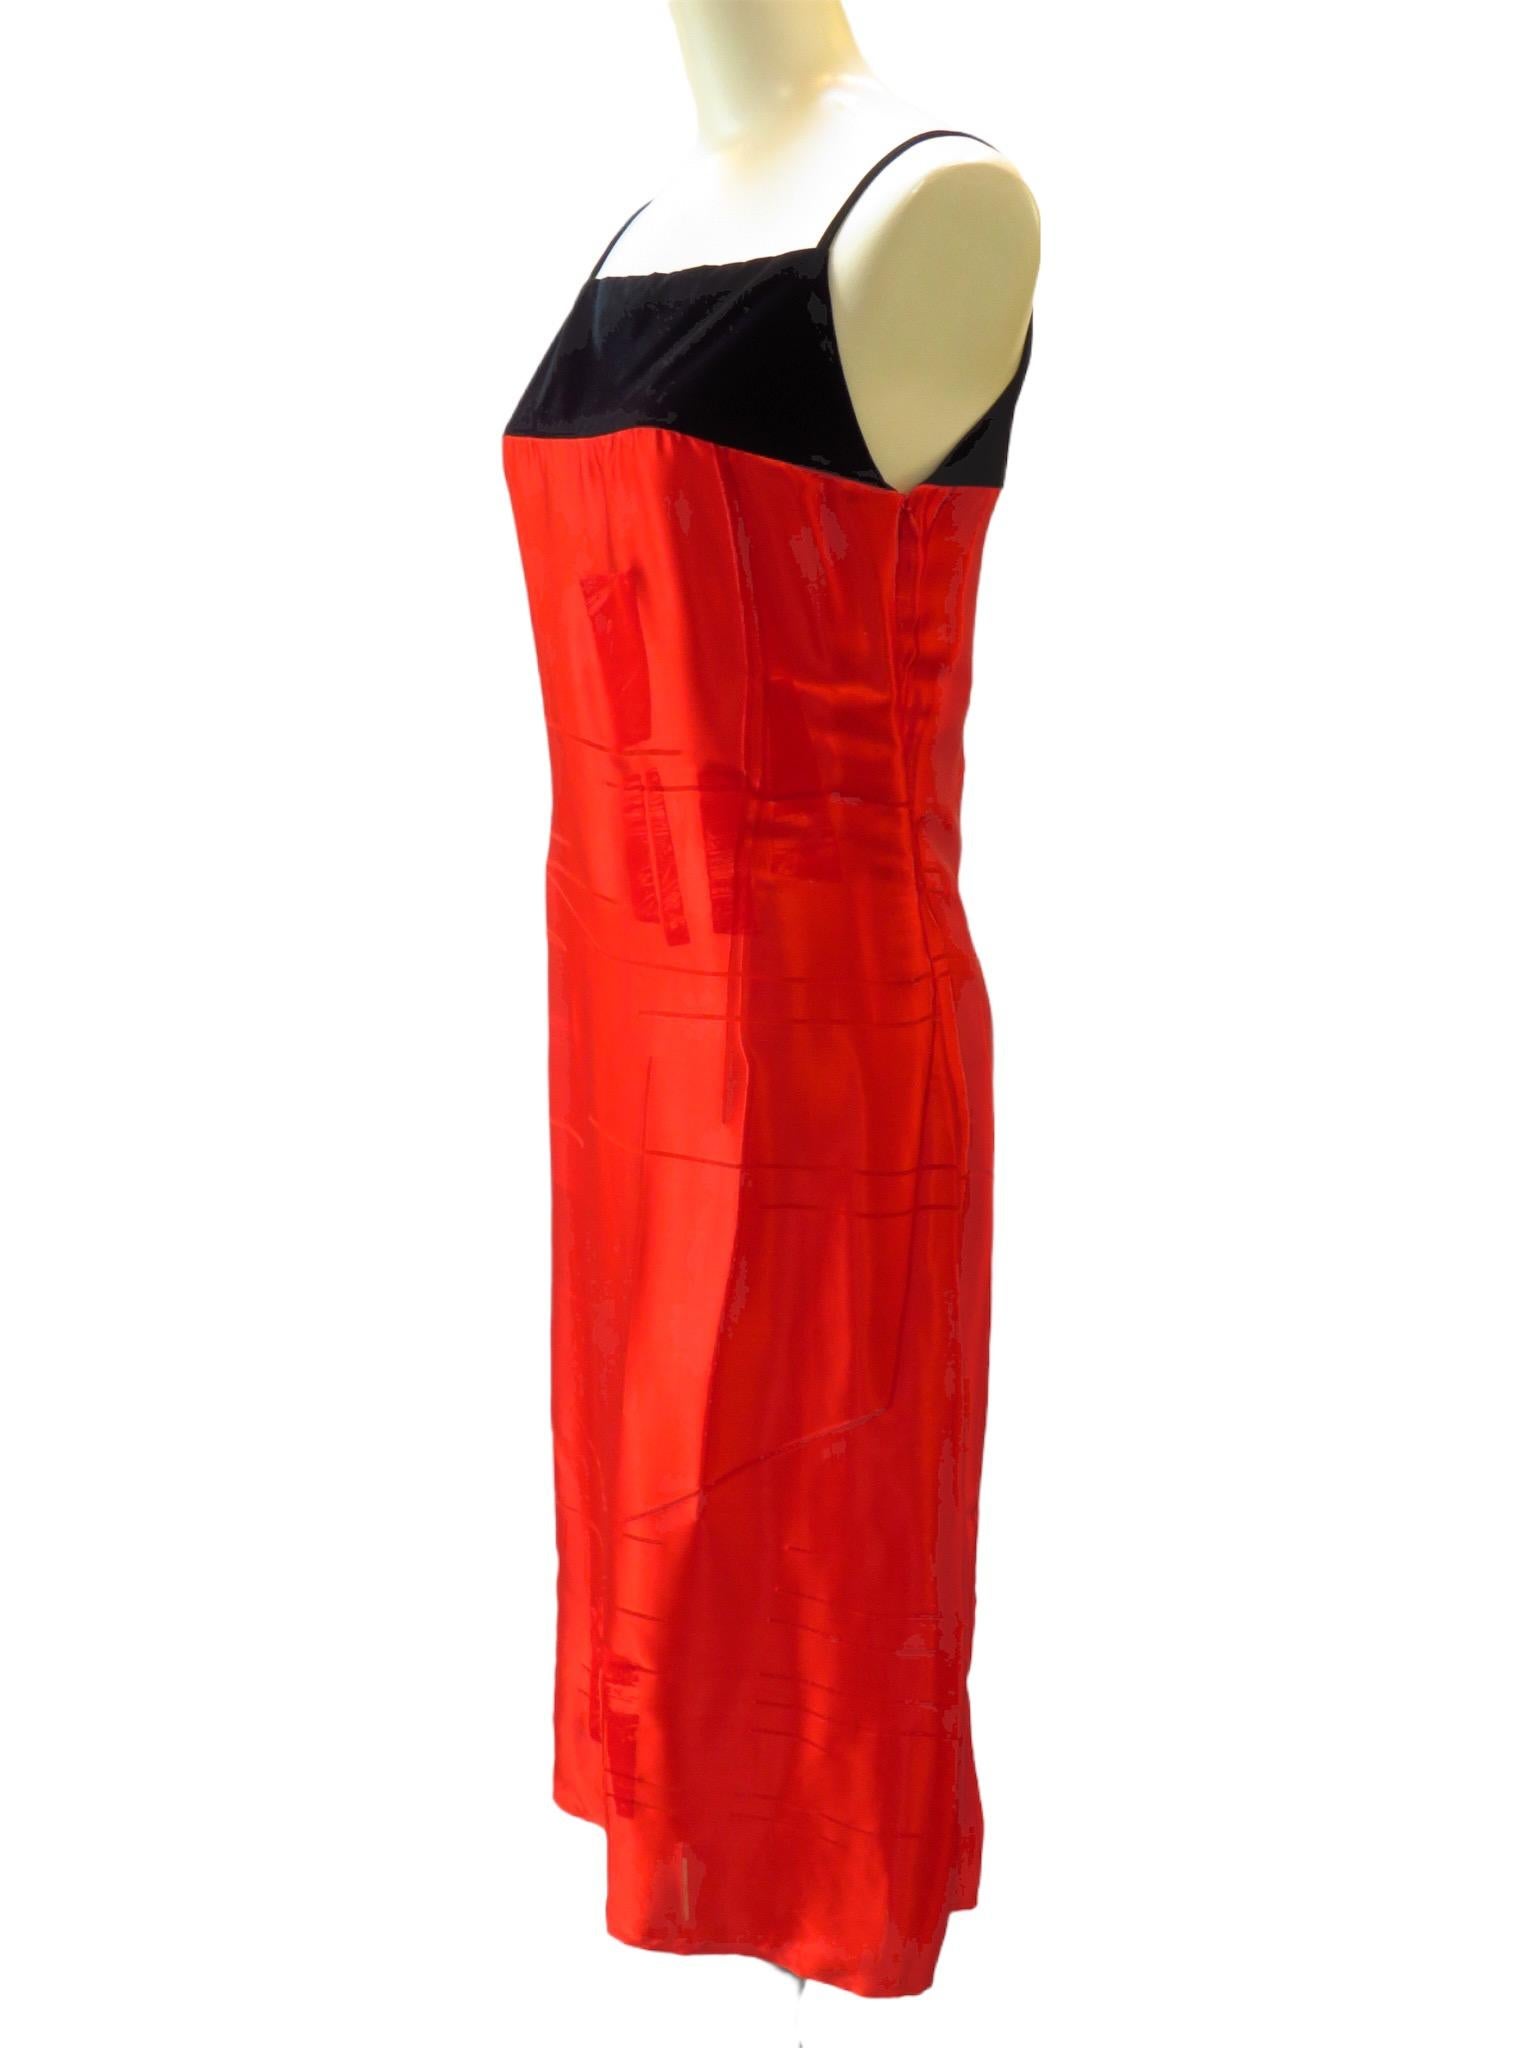 Black velvet caps off this bright red silk dress from Martine Sitbon. The silk fabric is textured and falls below the knee. Side zip.